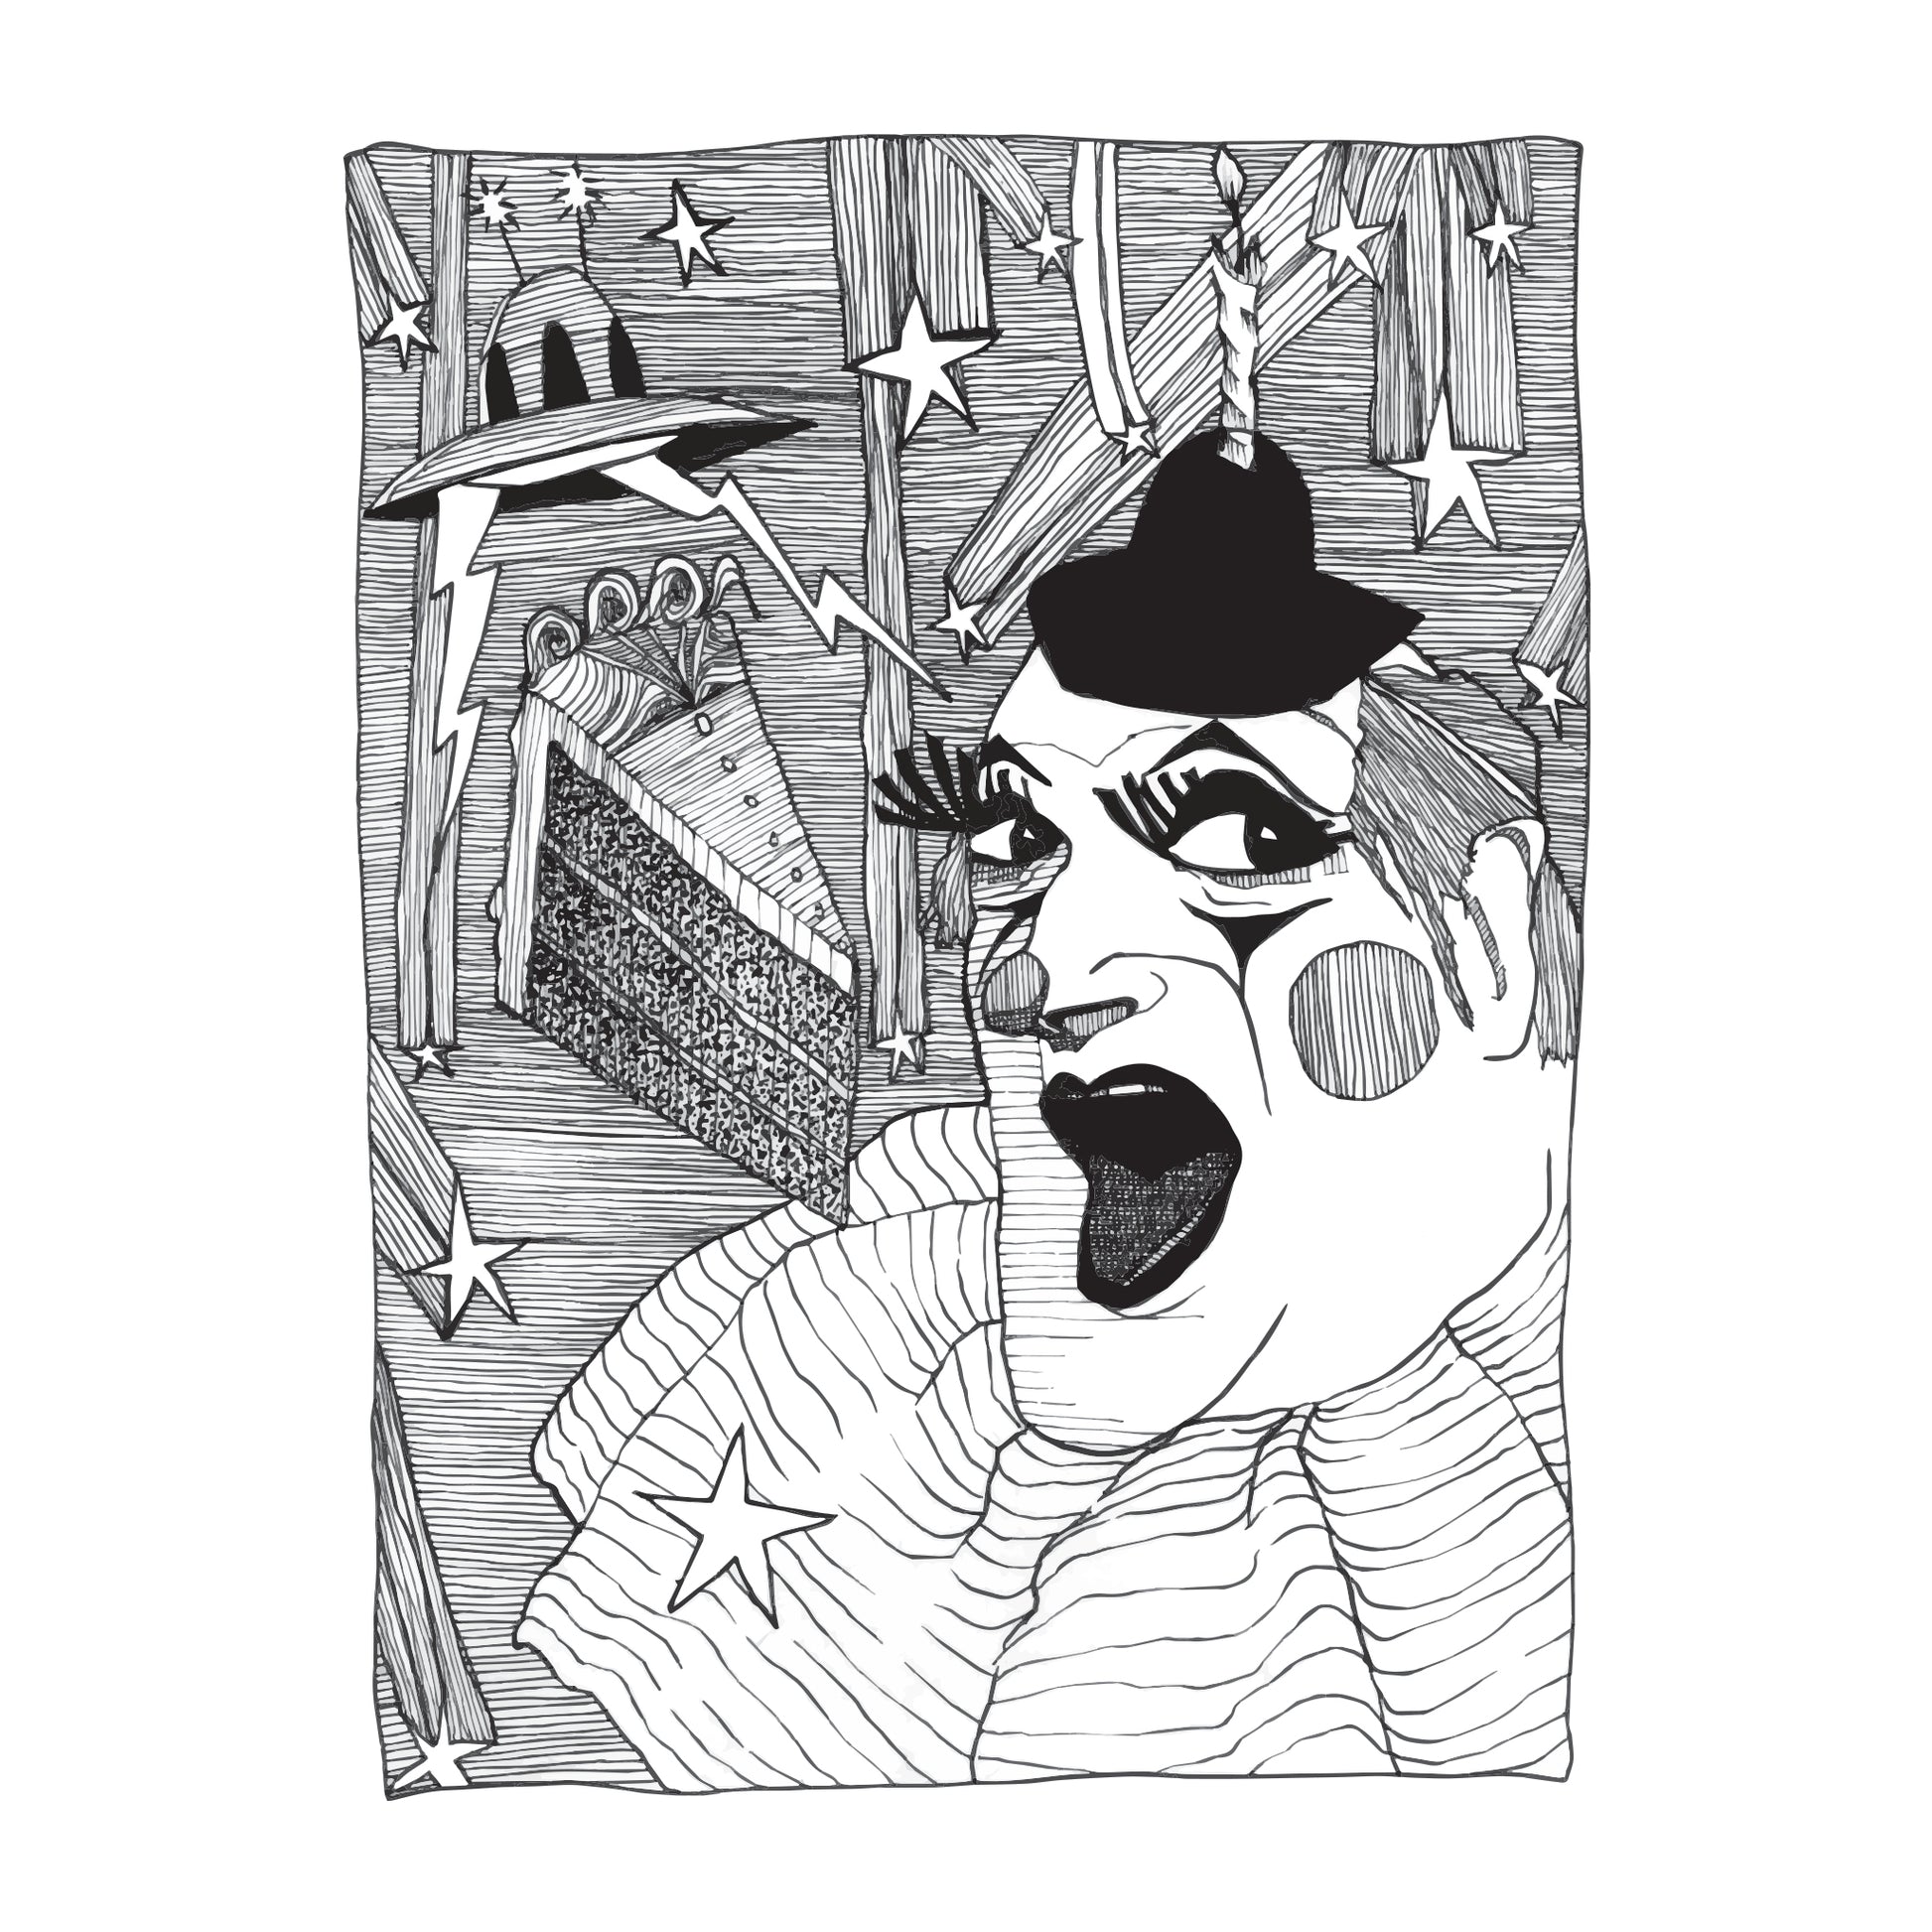 black and white illustration of a clown, wearing a hat with a lit candle in it, with mouth open ready to take a bite of a piece of cake send down from a spaceship on a night filled with shooting stars 